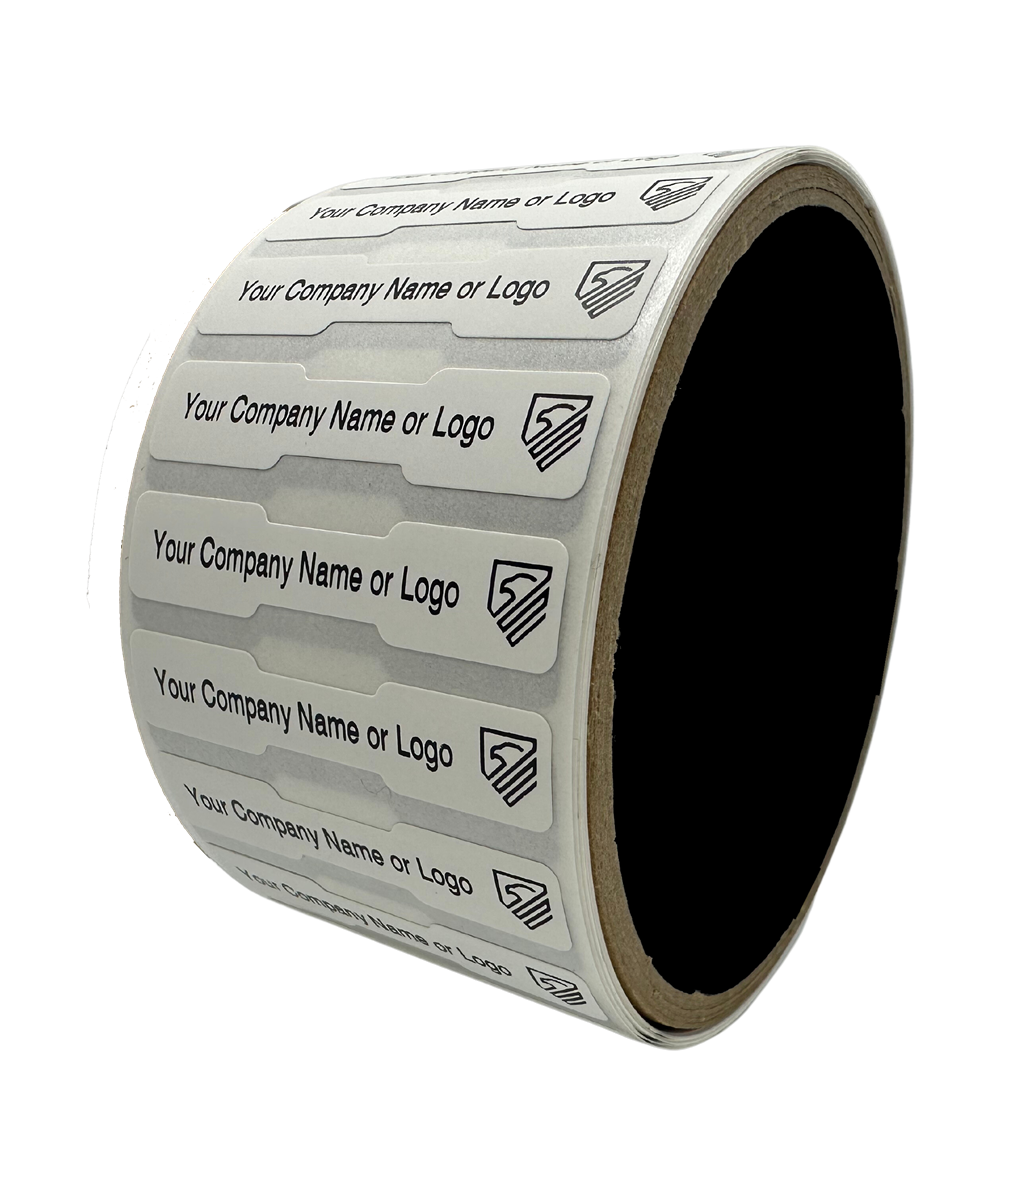 2,000 TamperColor White Custom Printed Security Labels: Tamper Evident, Dogbone Shape Size 1.75" x 0.375 (44mm x 9mm) >Click on item details to customize.